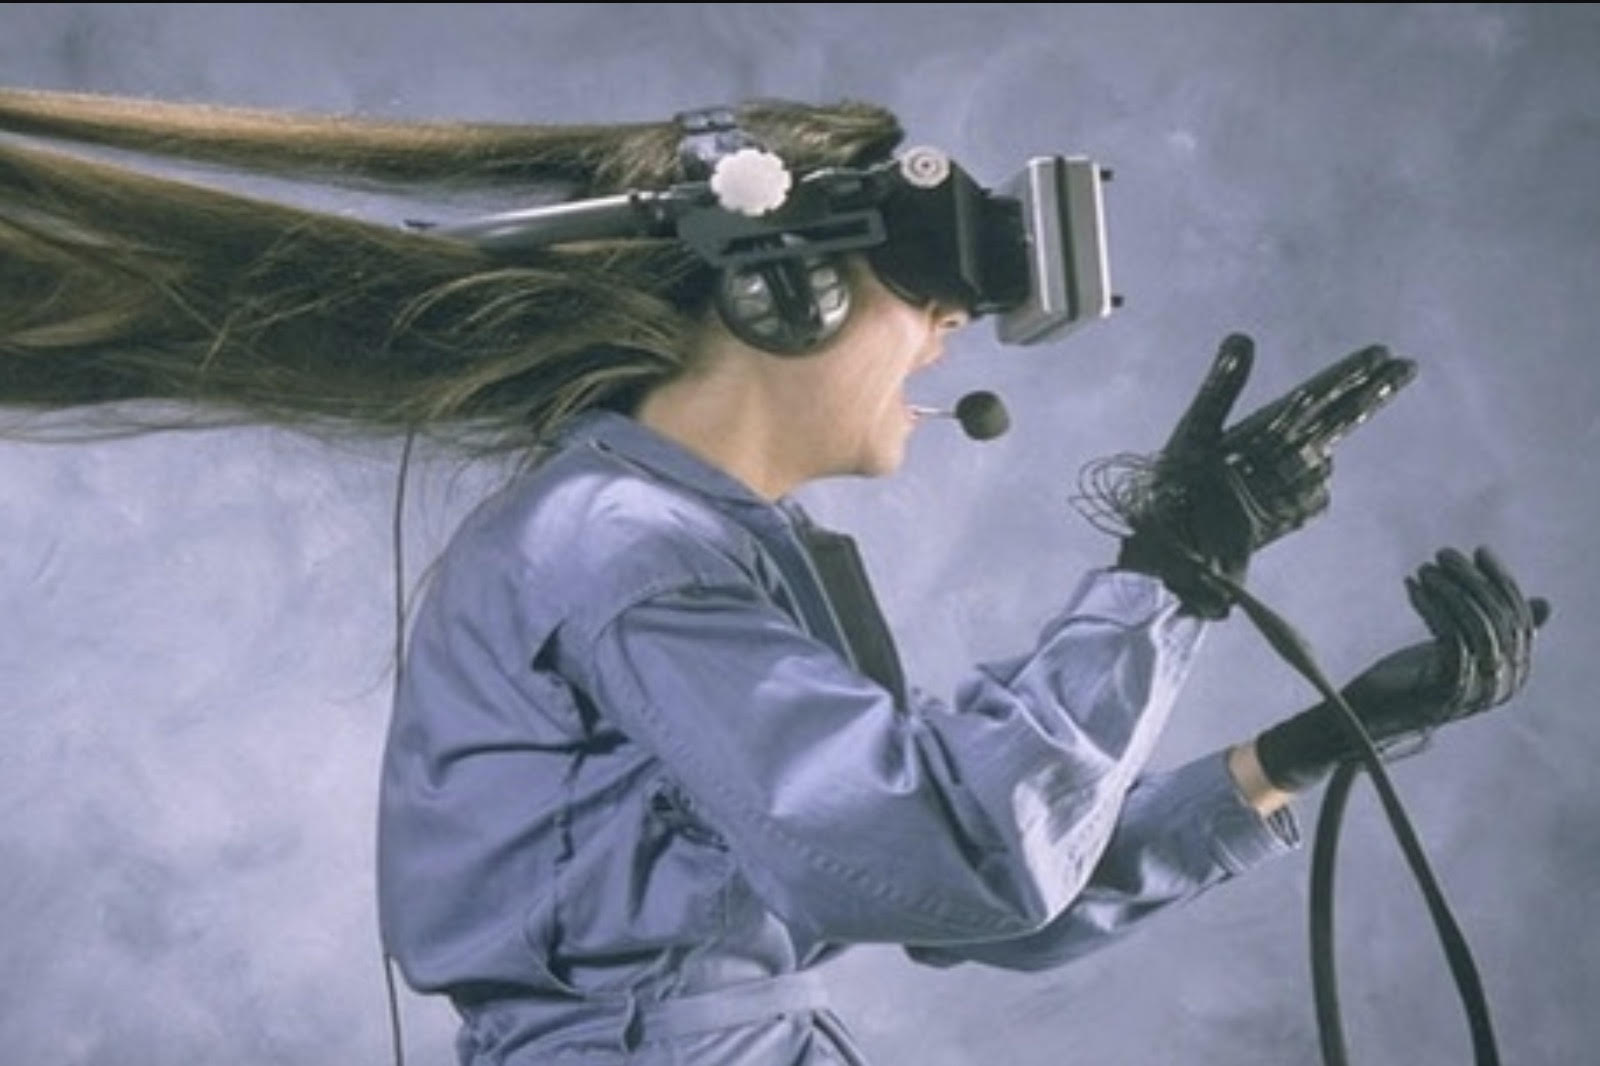 A woman using a VR headset. Her long hair is blowing straight back.